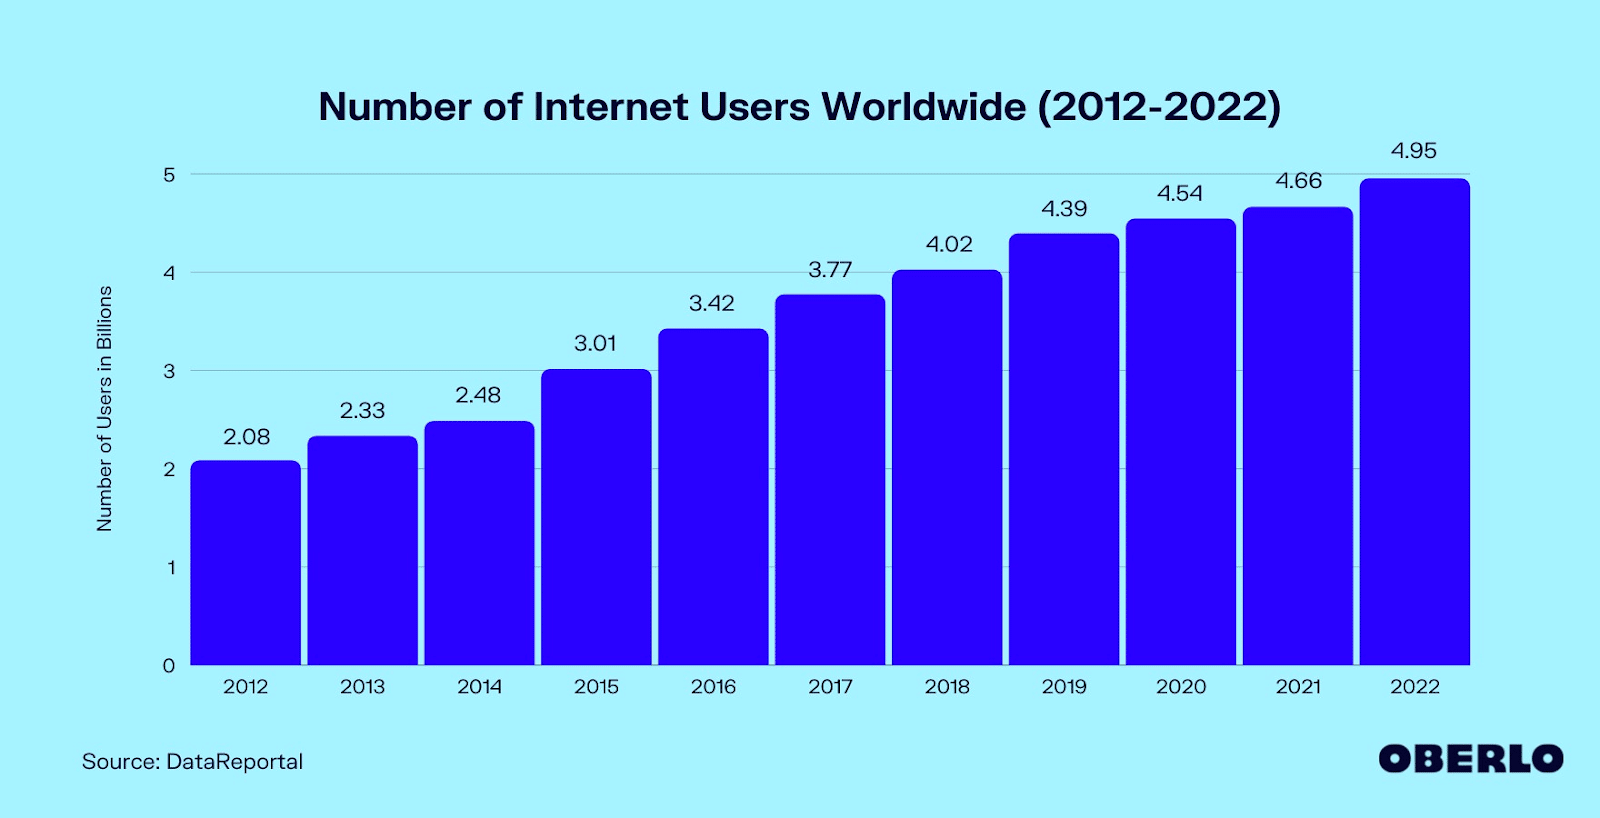 The number of internet users worldwide